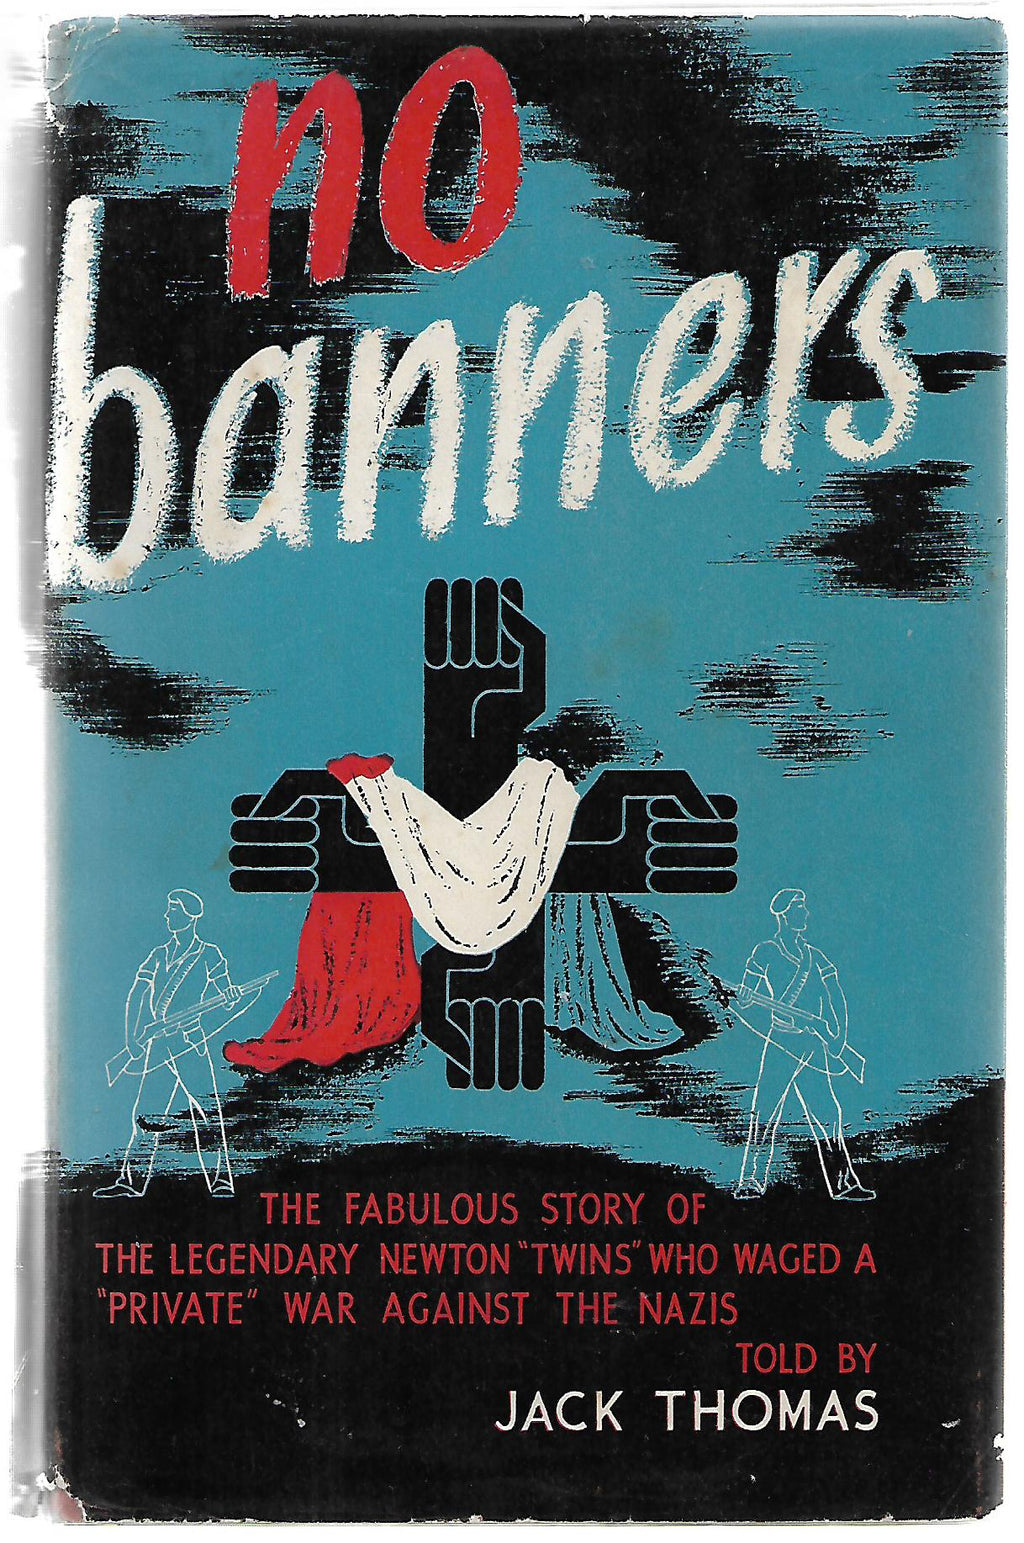 No Banners - by Jack Thomas. [First Edition]